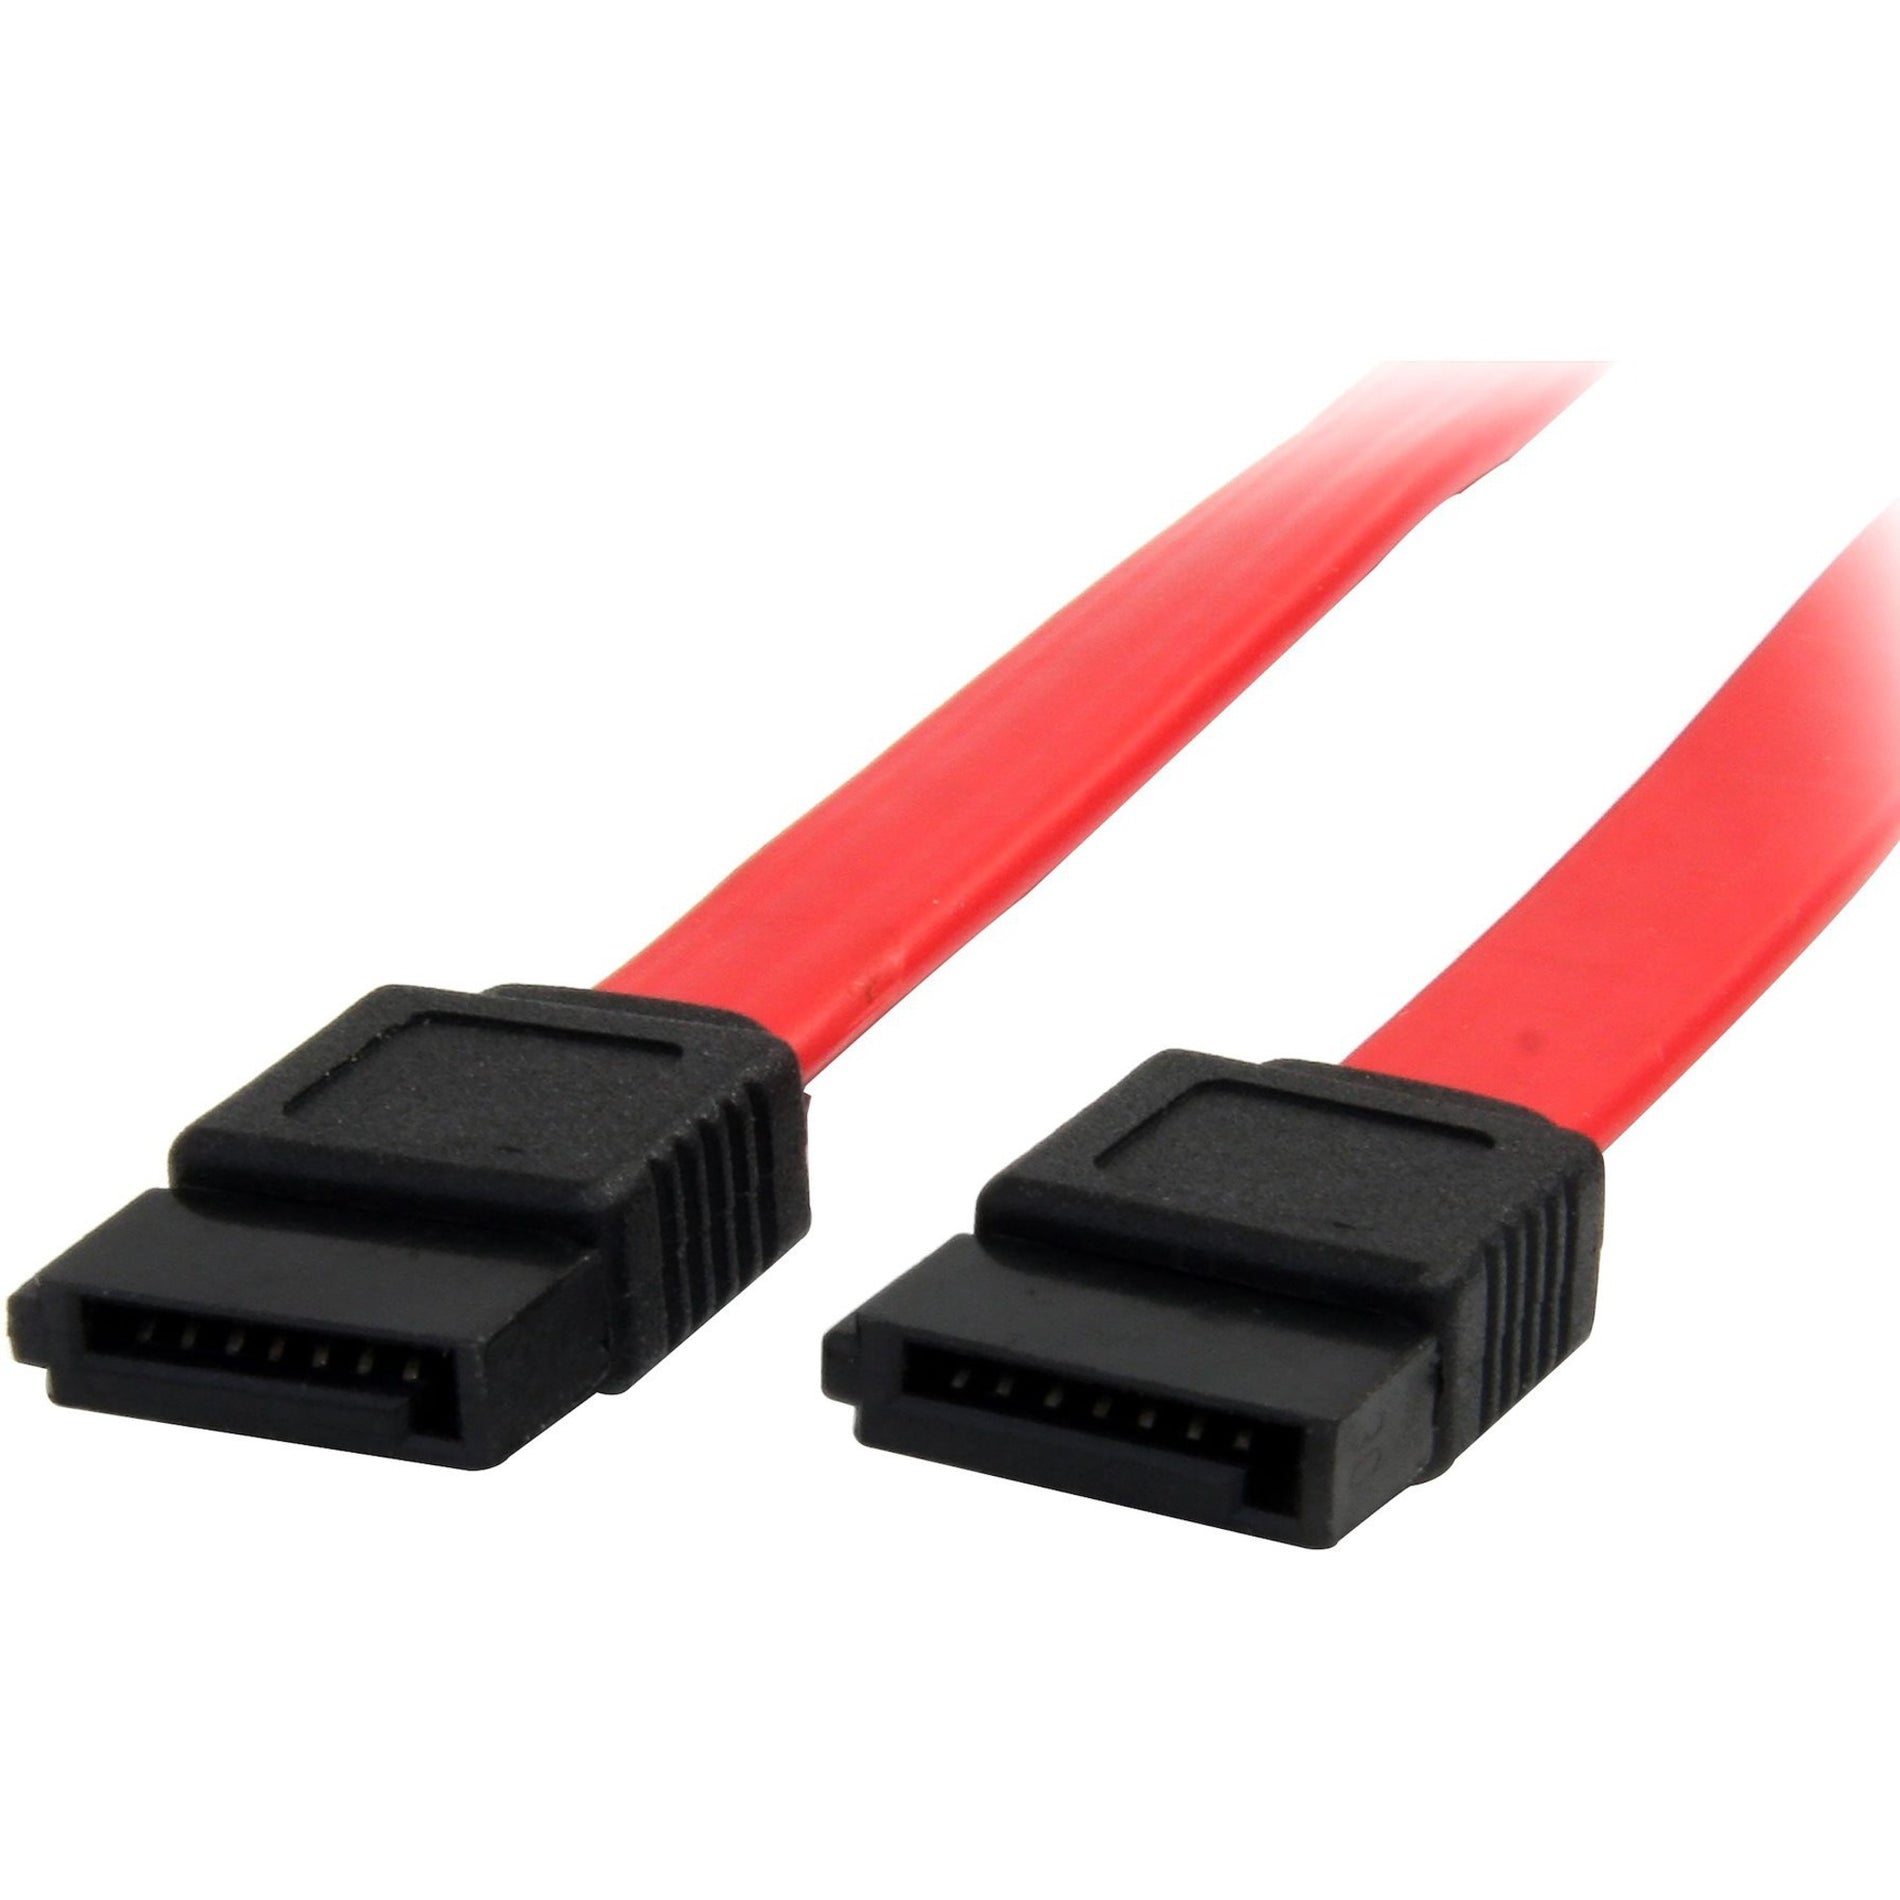 StarTech.com SATA24 24in SATA Serial ATA Cable, Flexible 2 ft Data Transfer Cable, 6 Gbit/s, Red